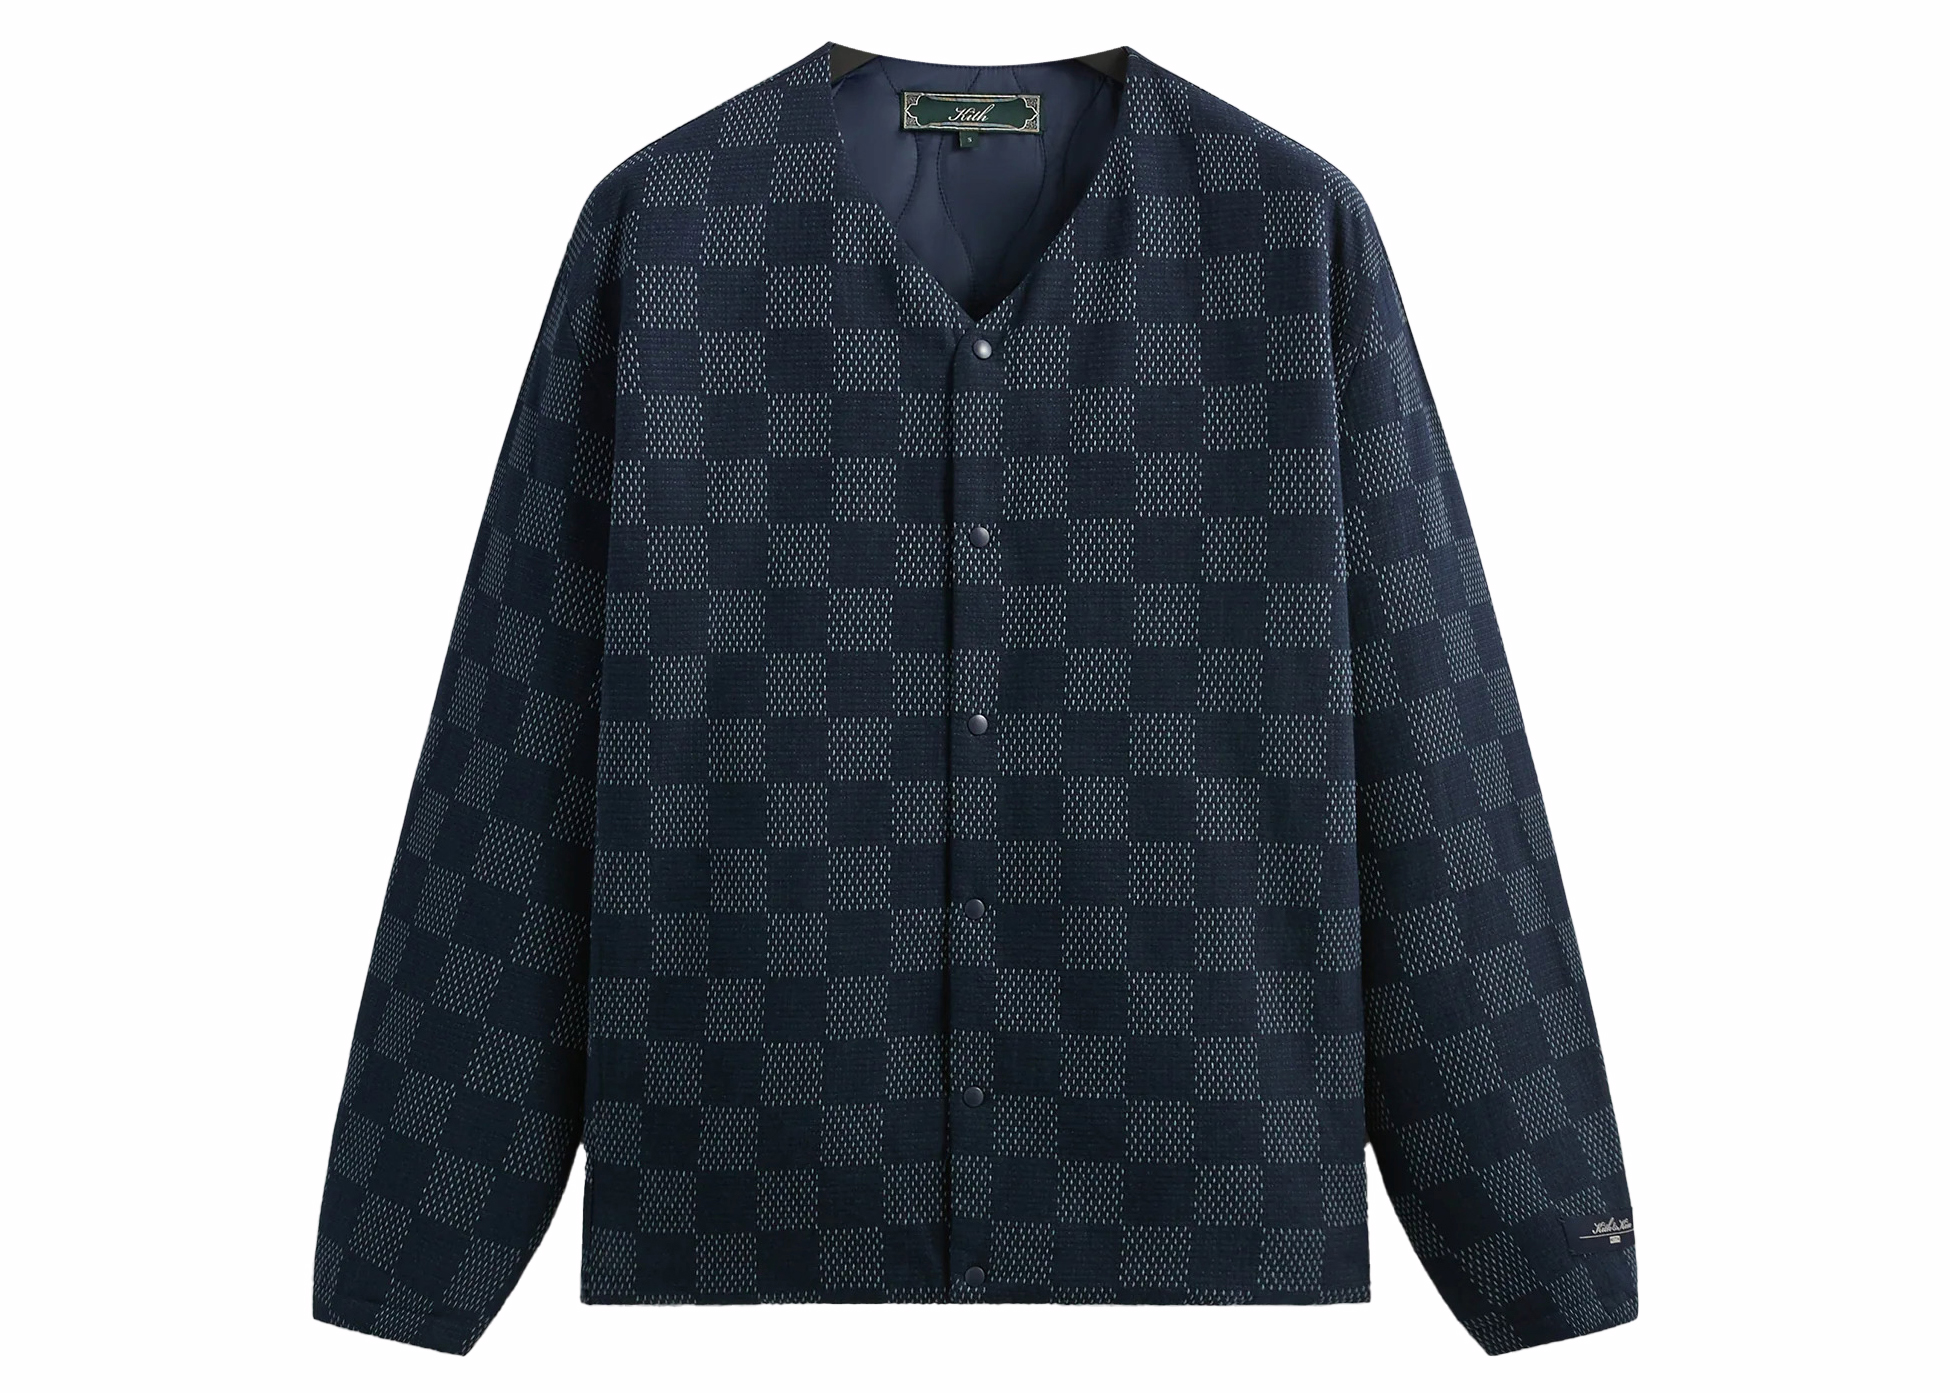 Kith Reversible Winfield Quilted LinerSup